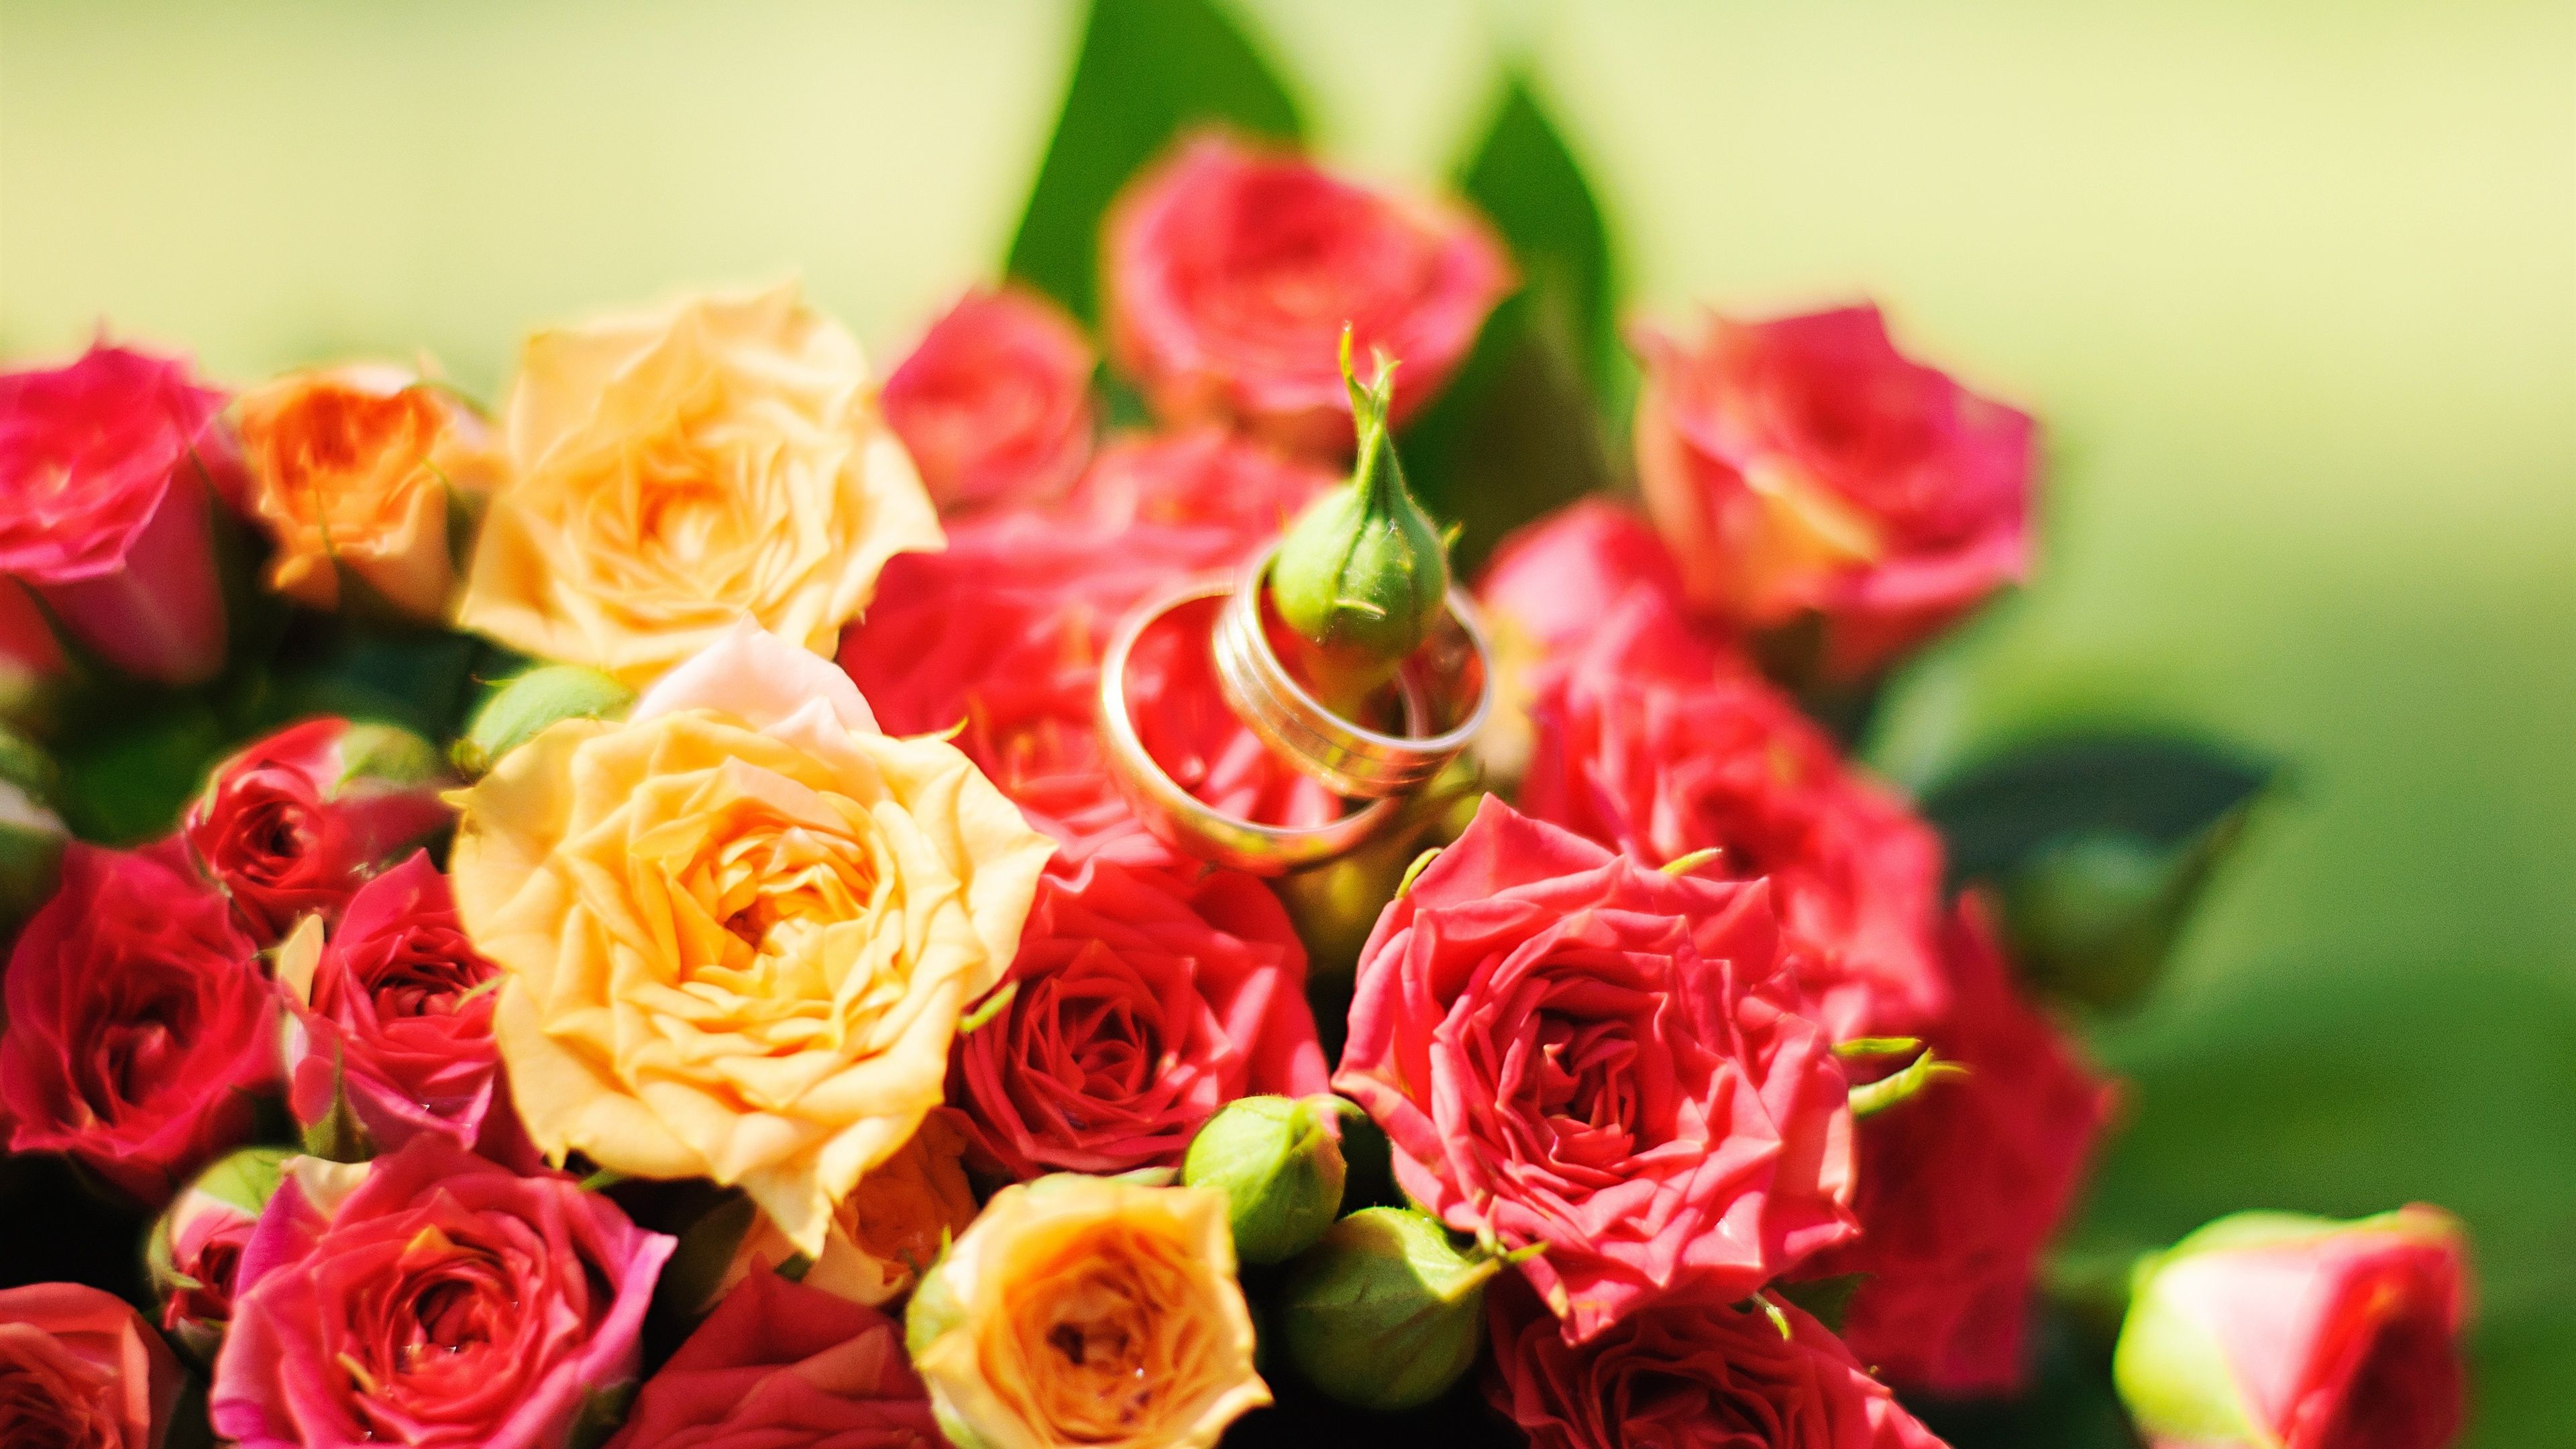 Wallpaper Red and yellow roses, rings 3840x2160 UHD 4K Picture, Image